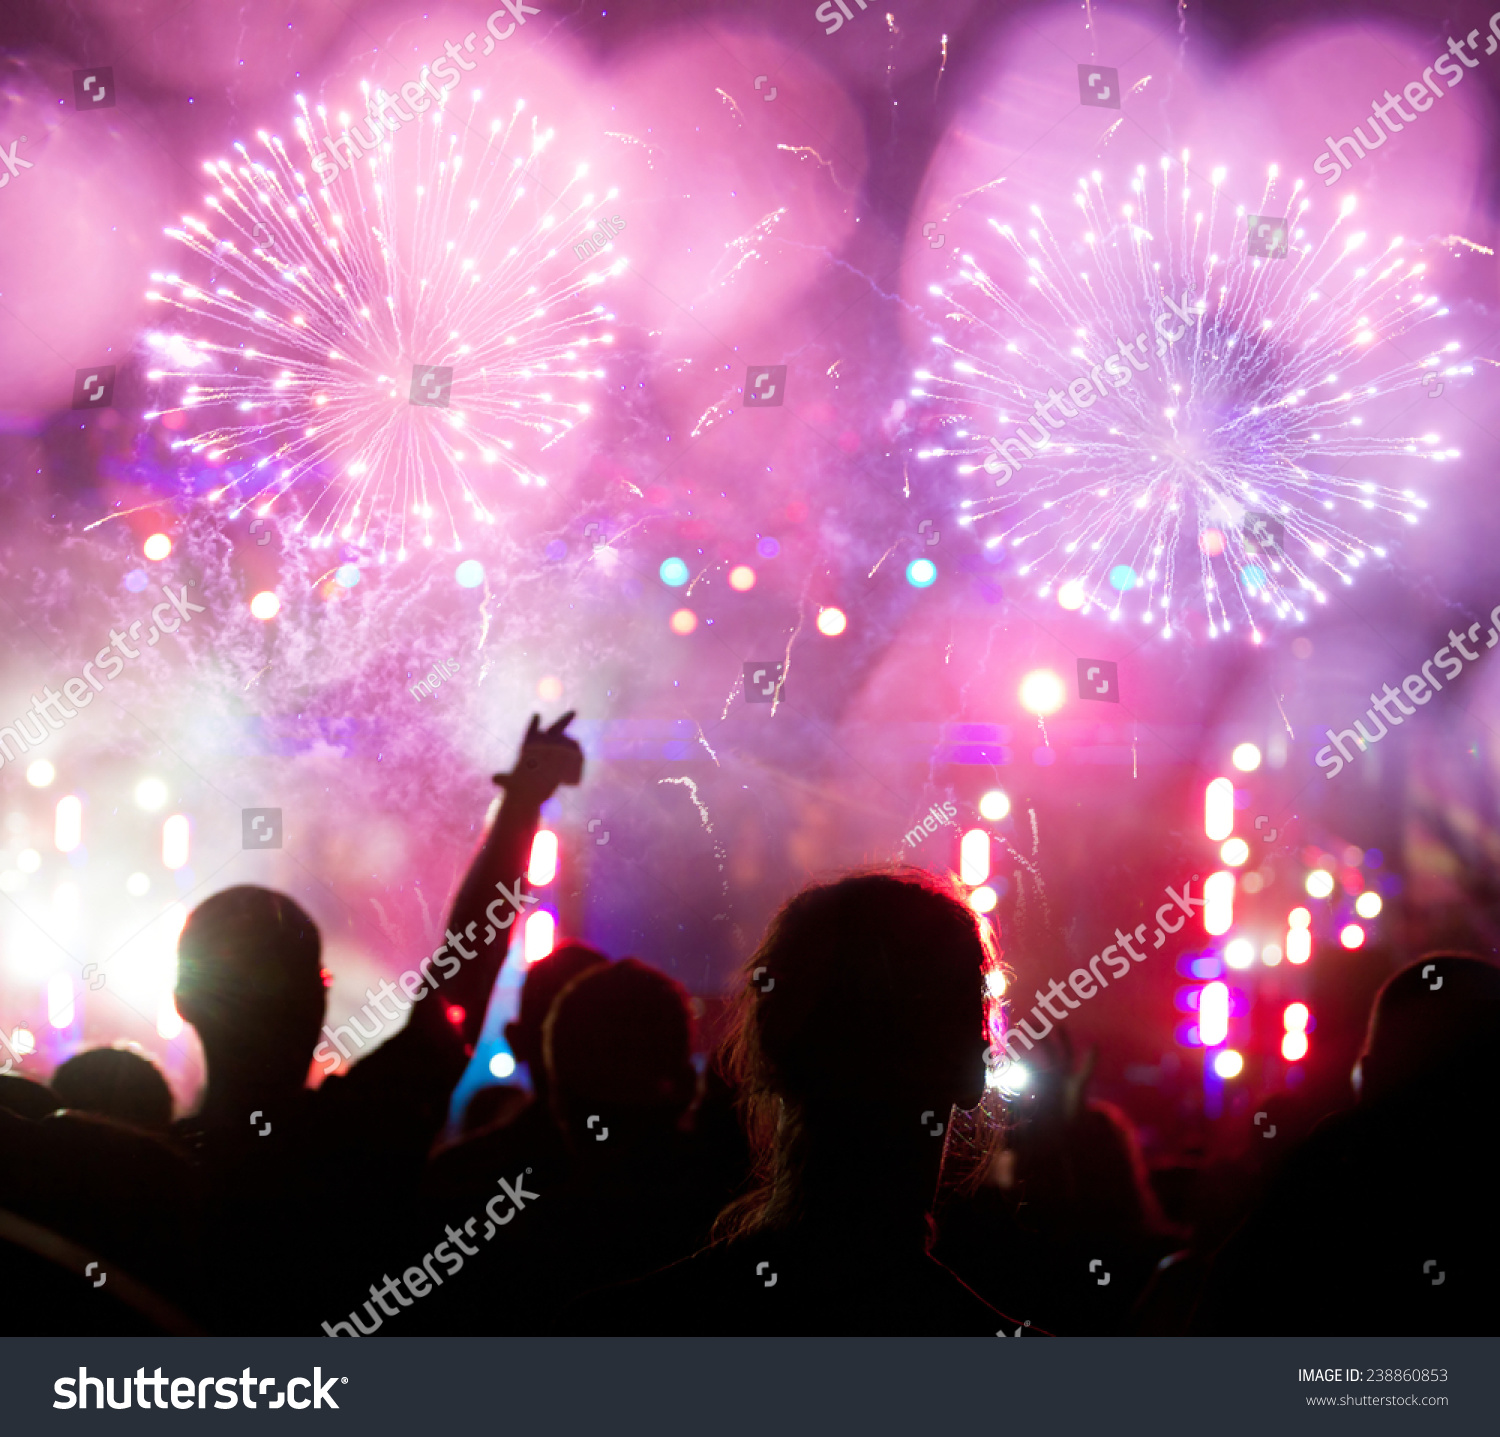 New Year concept -  fireworks and cheering crowd celebrating the New year #238860853